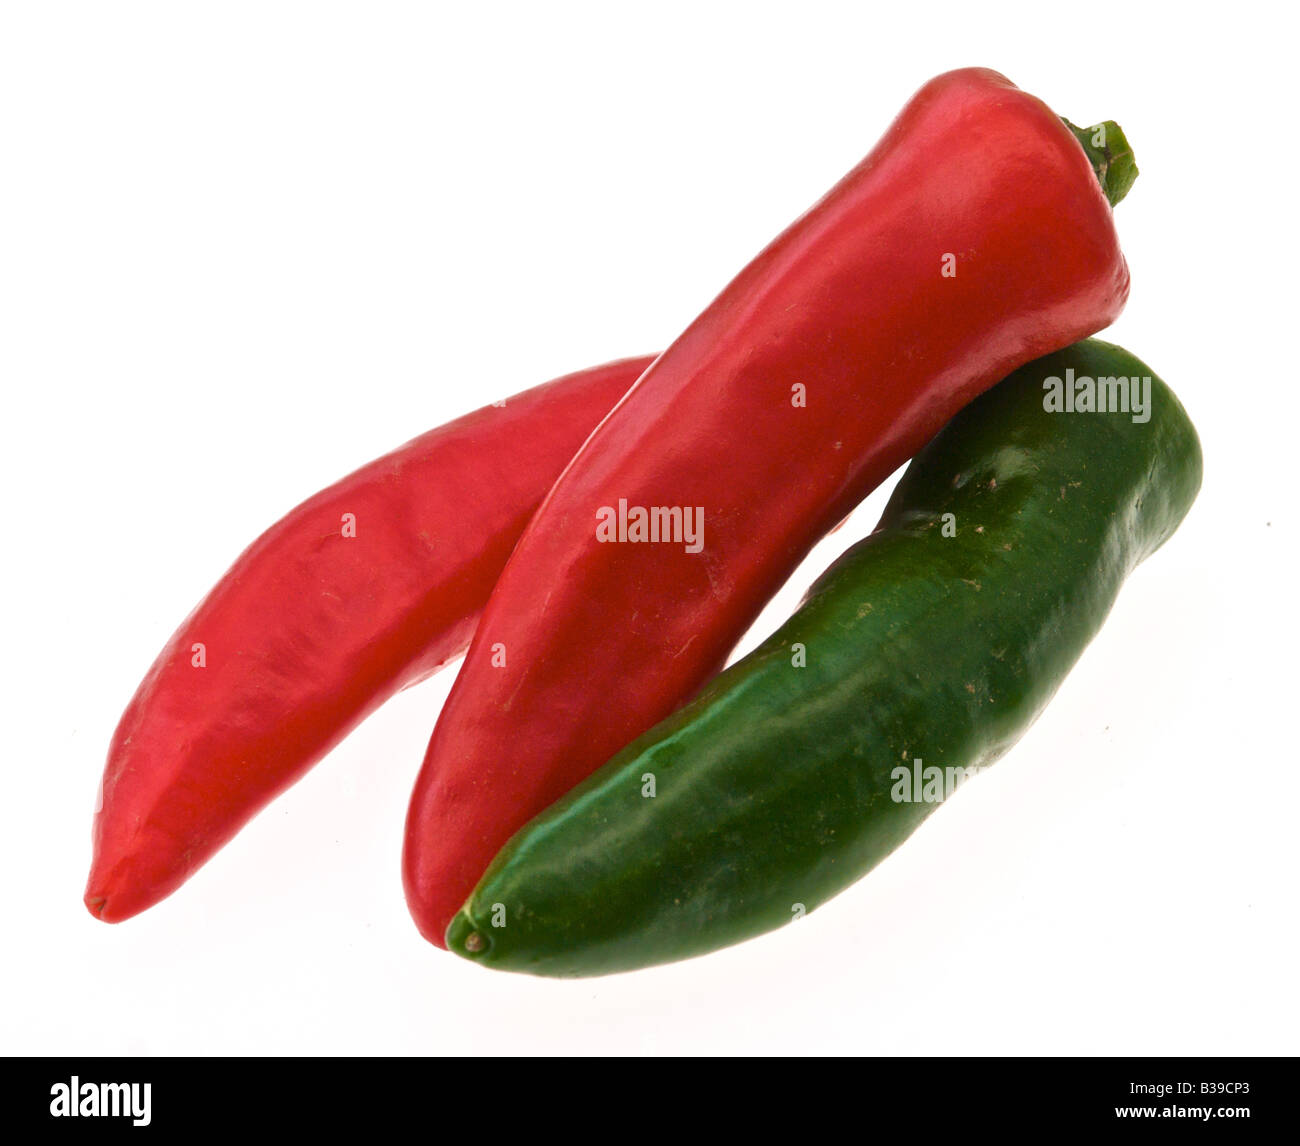 CULINARY HERBS HERB Chillies Chili Pepper capsicum frutescens a much used herb Stock Photo